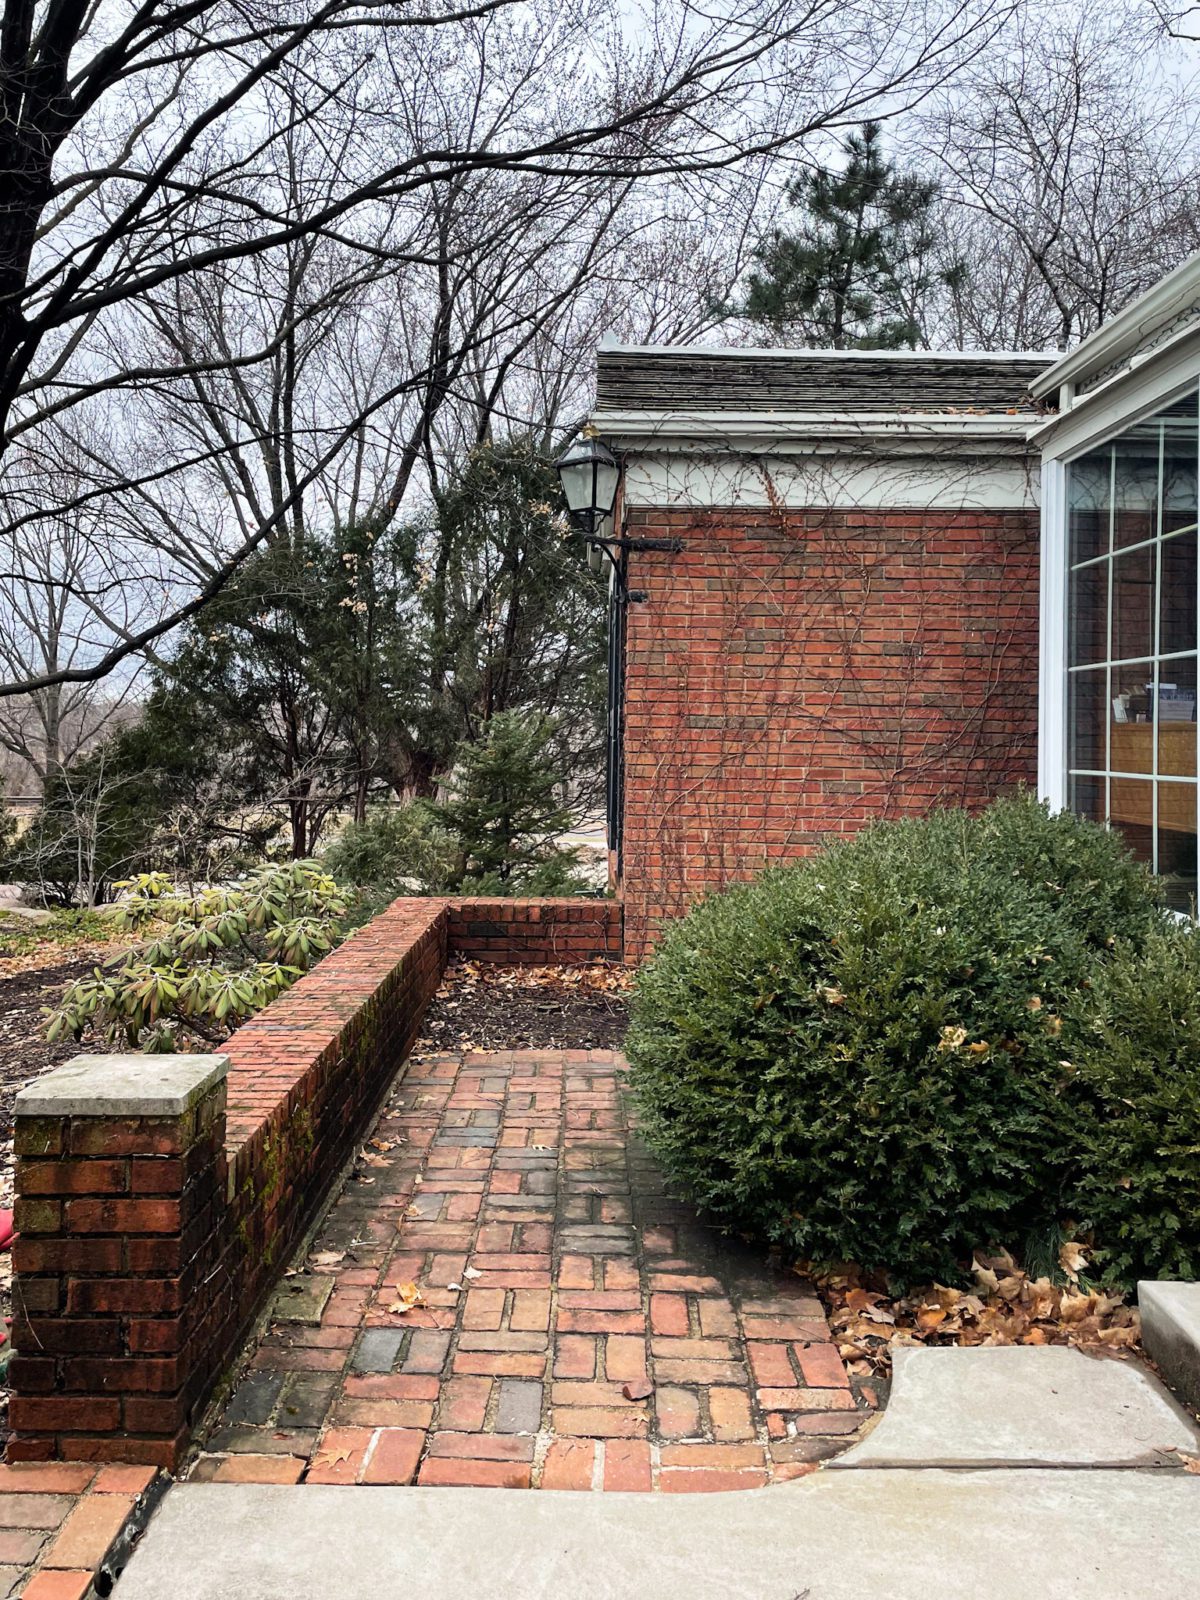 A brick patio in early spring.